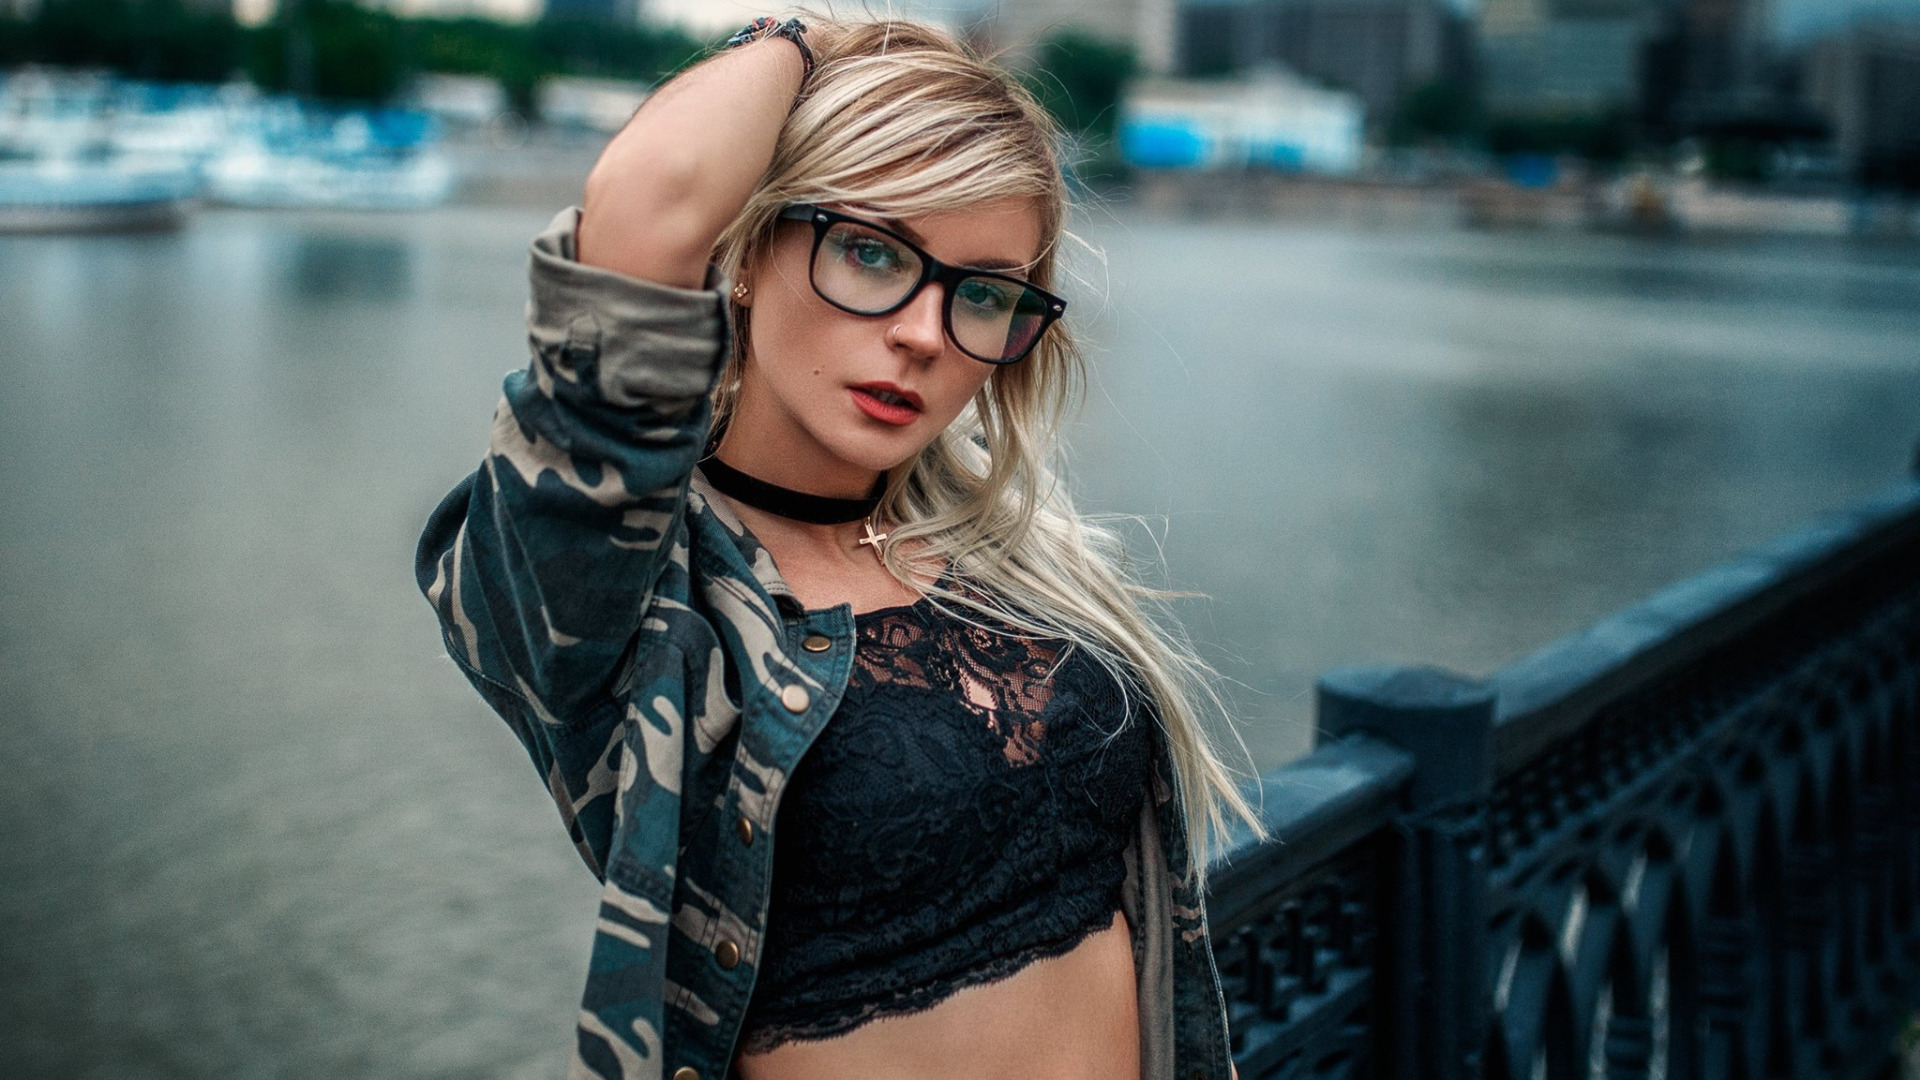 Blonde with glasses